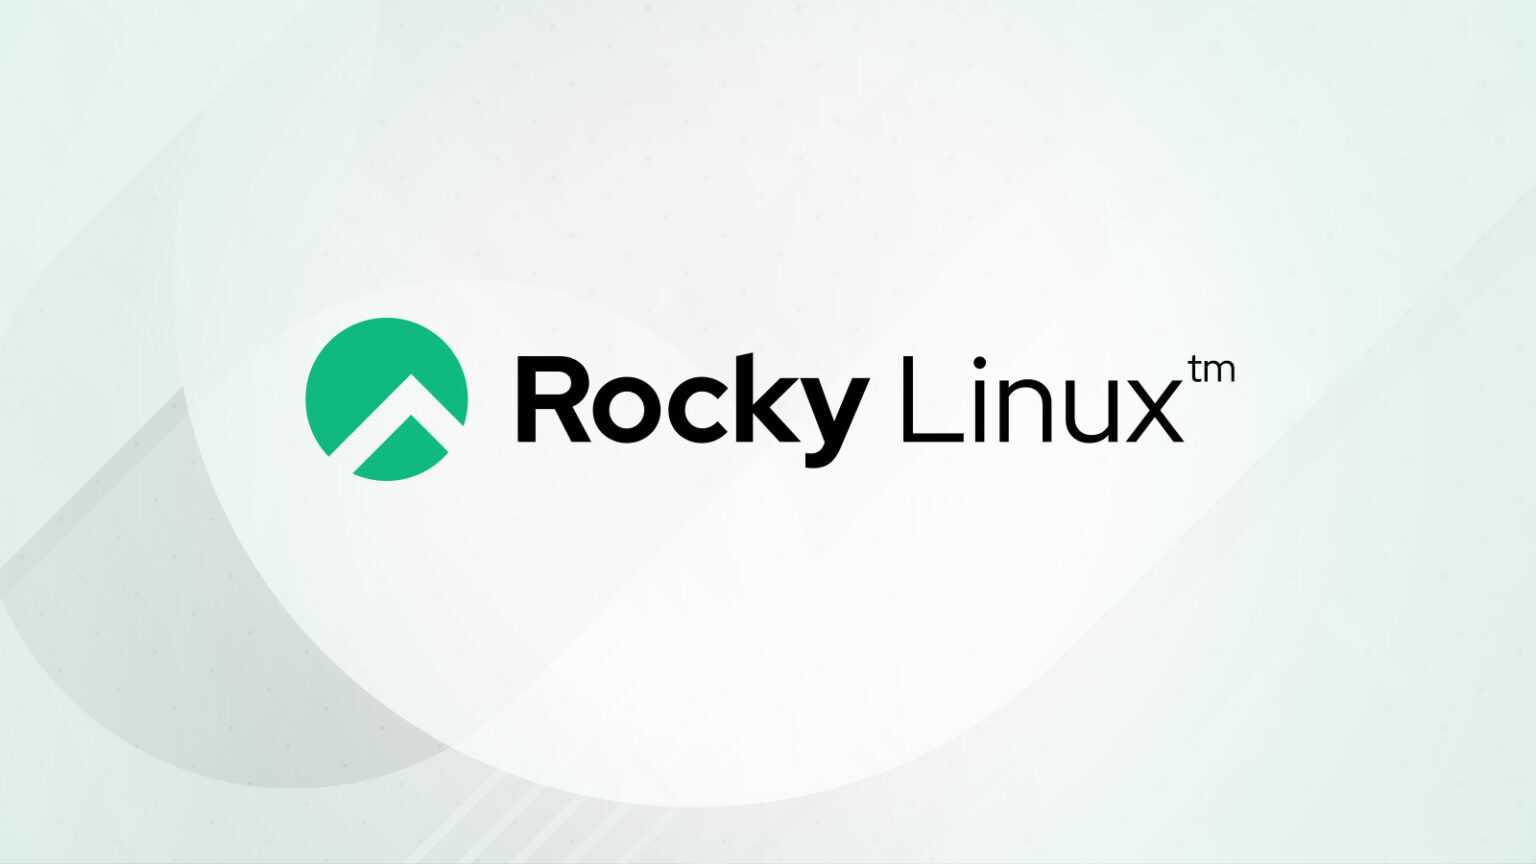 How to Run Rocky Linux from Windows